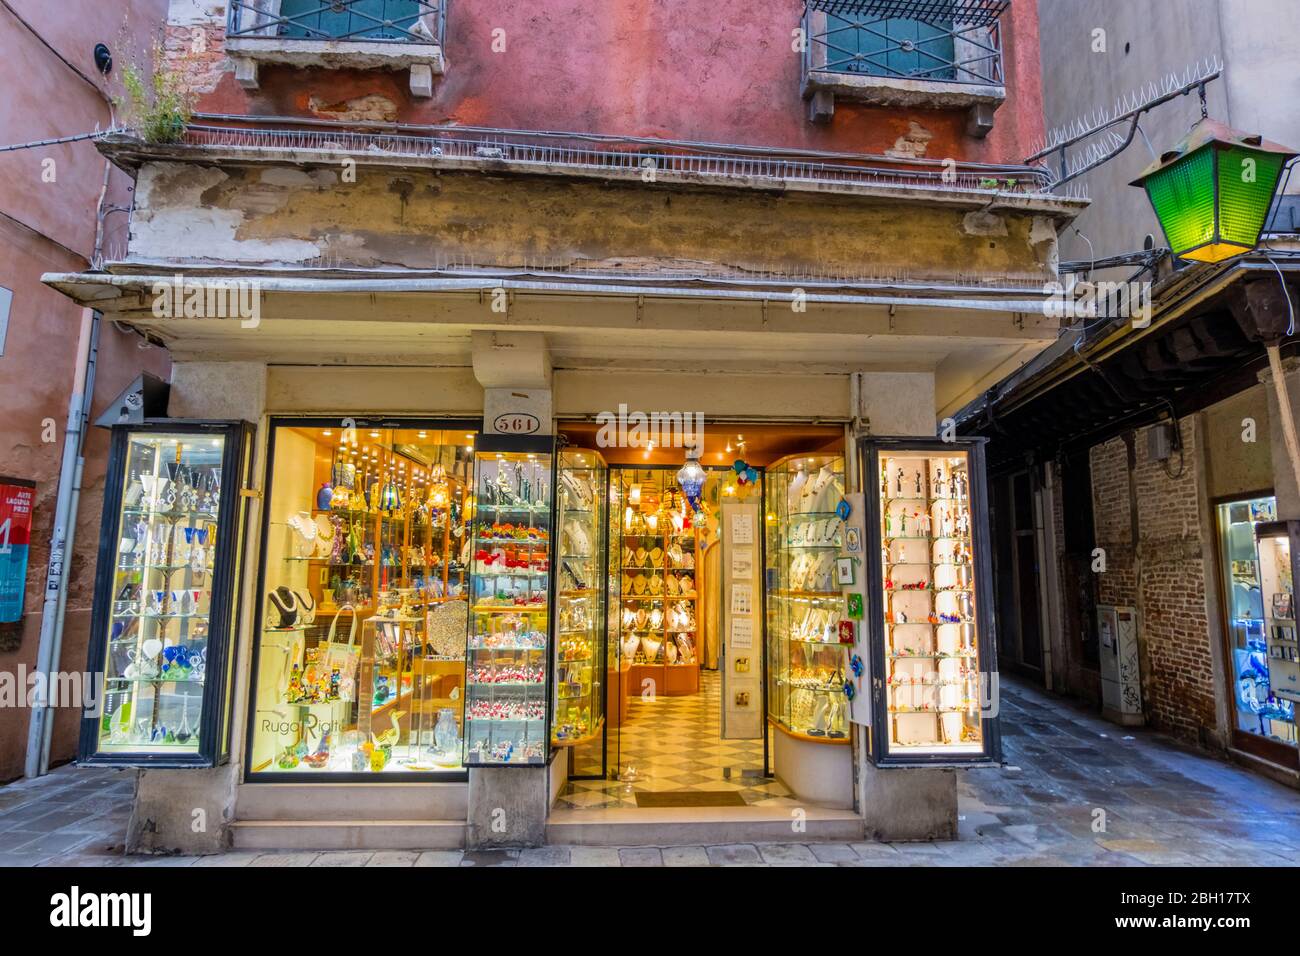 Glass and jewelry shop, Rugeta del Ravano shoppng street, San Polo district, Venice, Italy Stock Photo